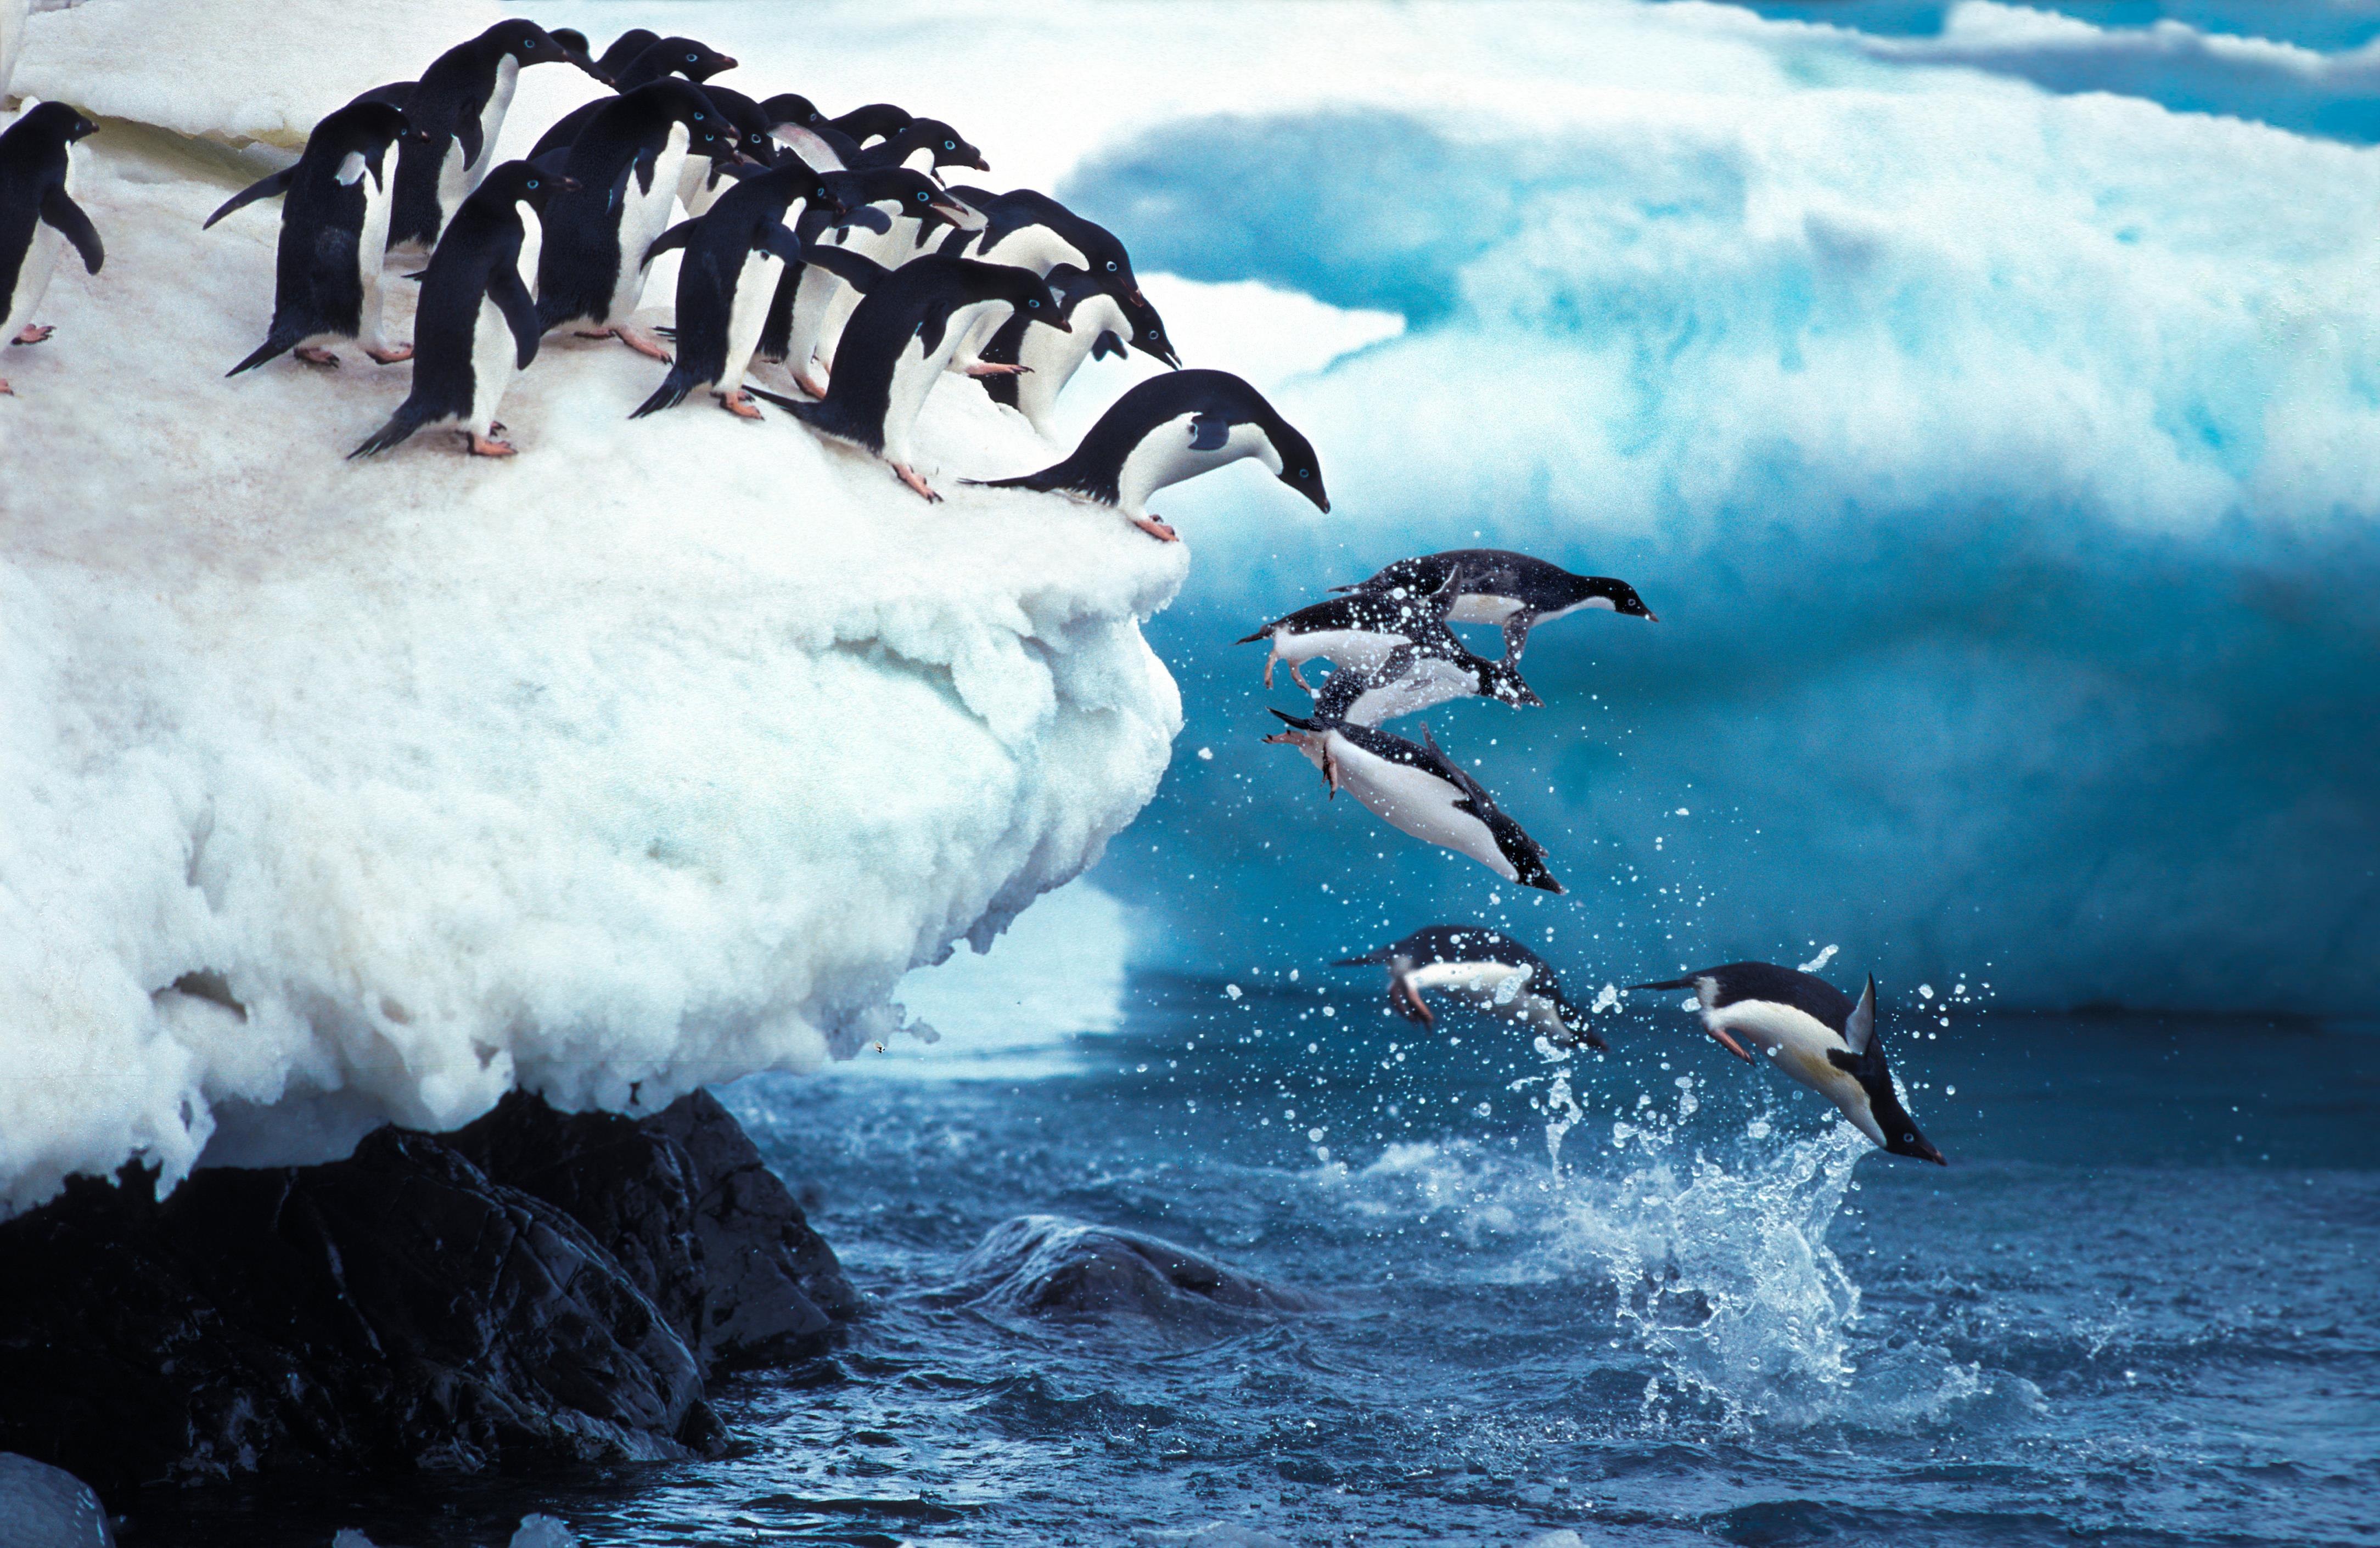 Adelie penguins jumping off a cliff in Antarctica